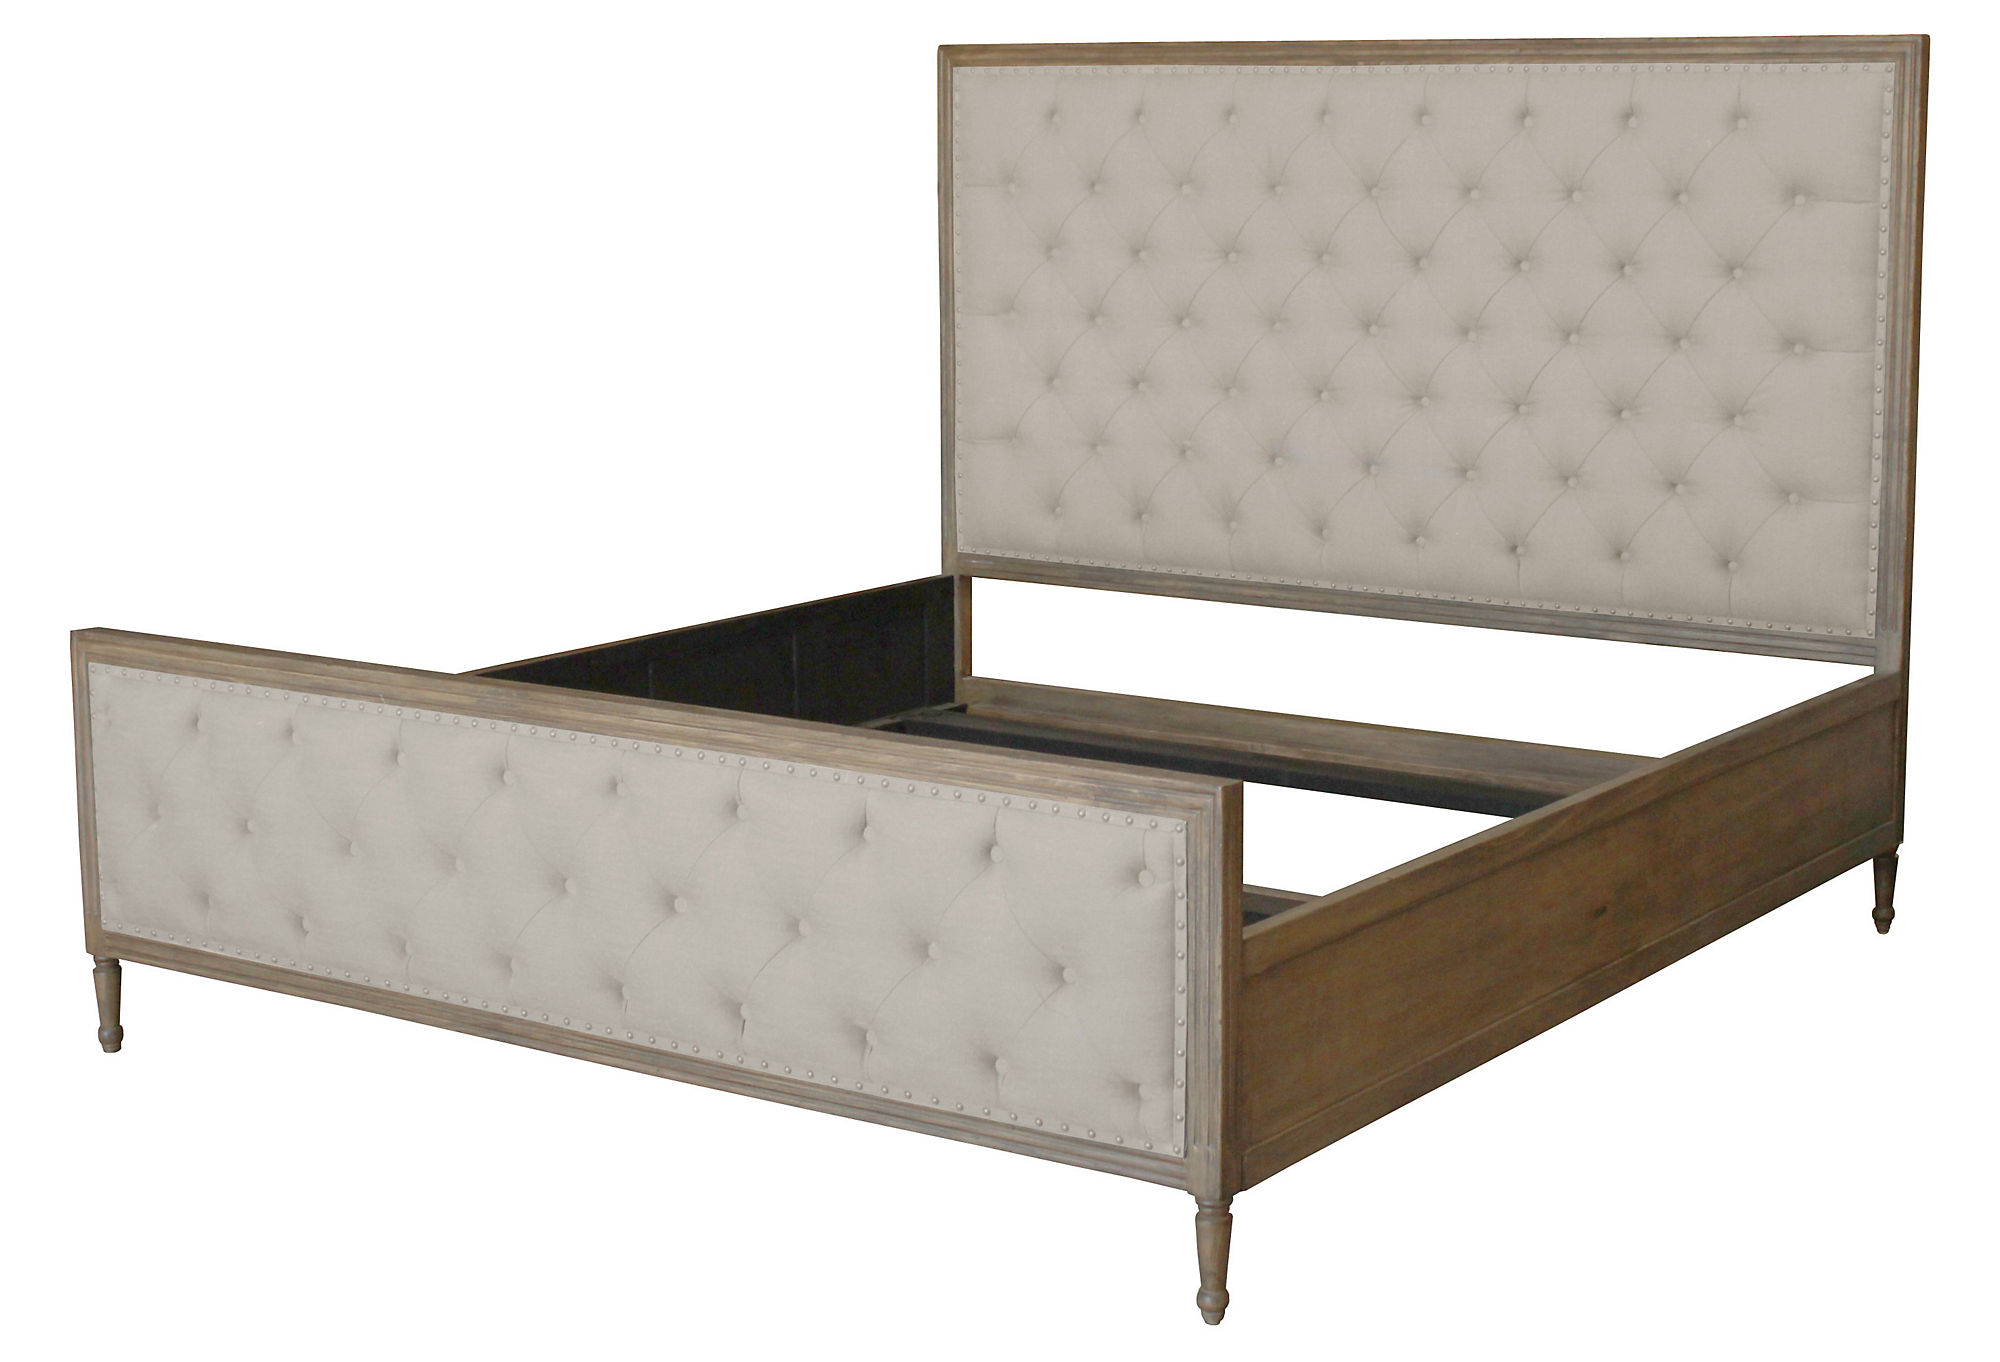 super king queen size bed headboard beds headboards dimensions platform chesterfield